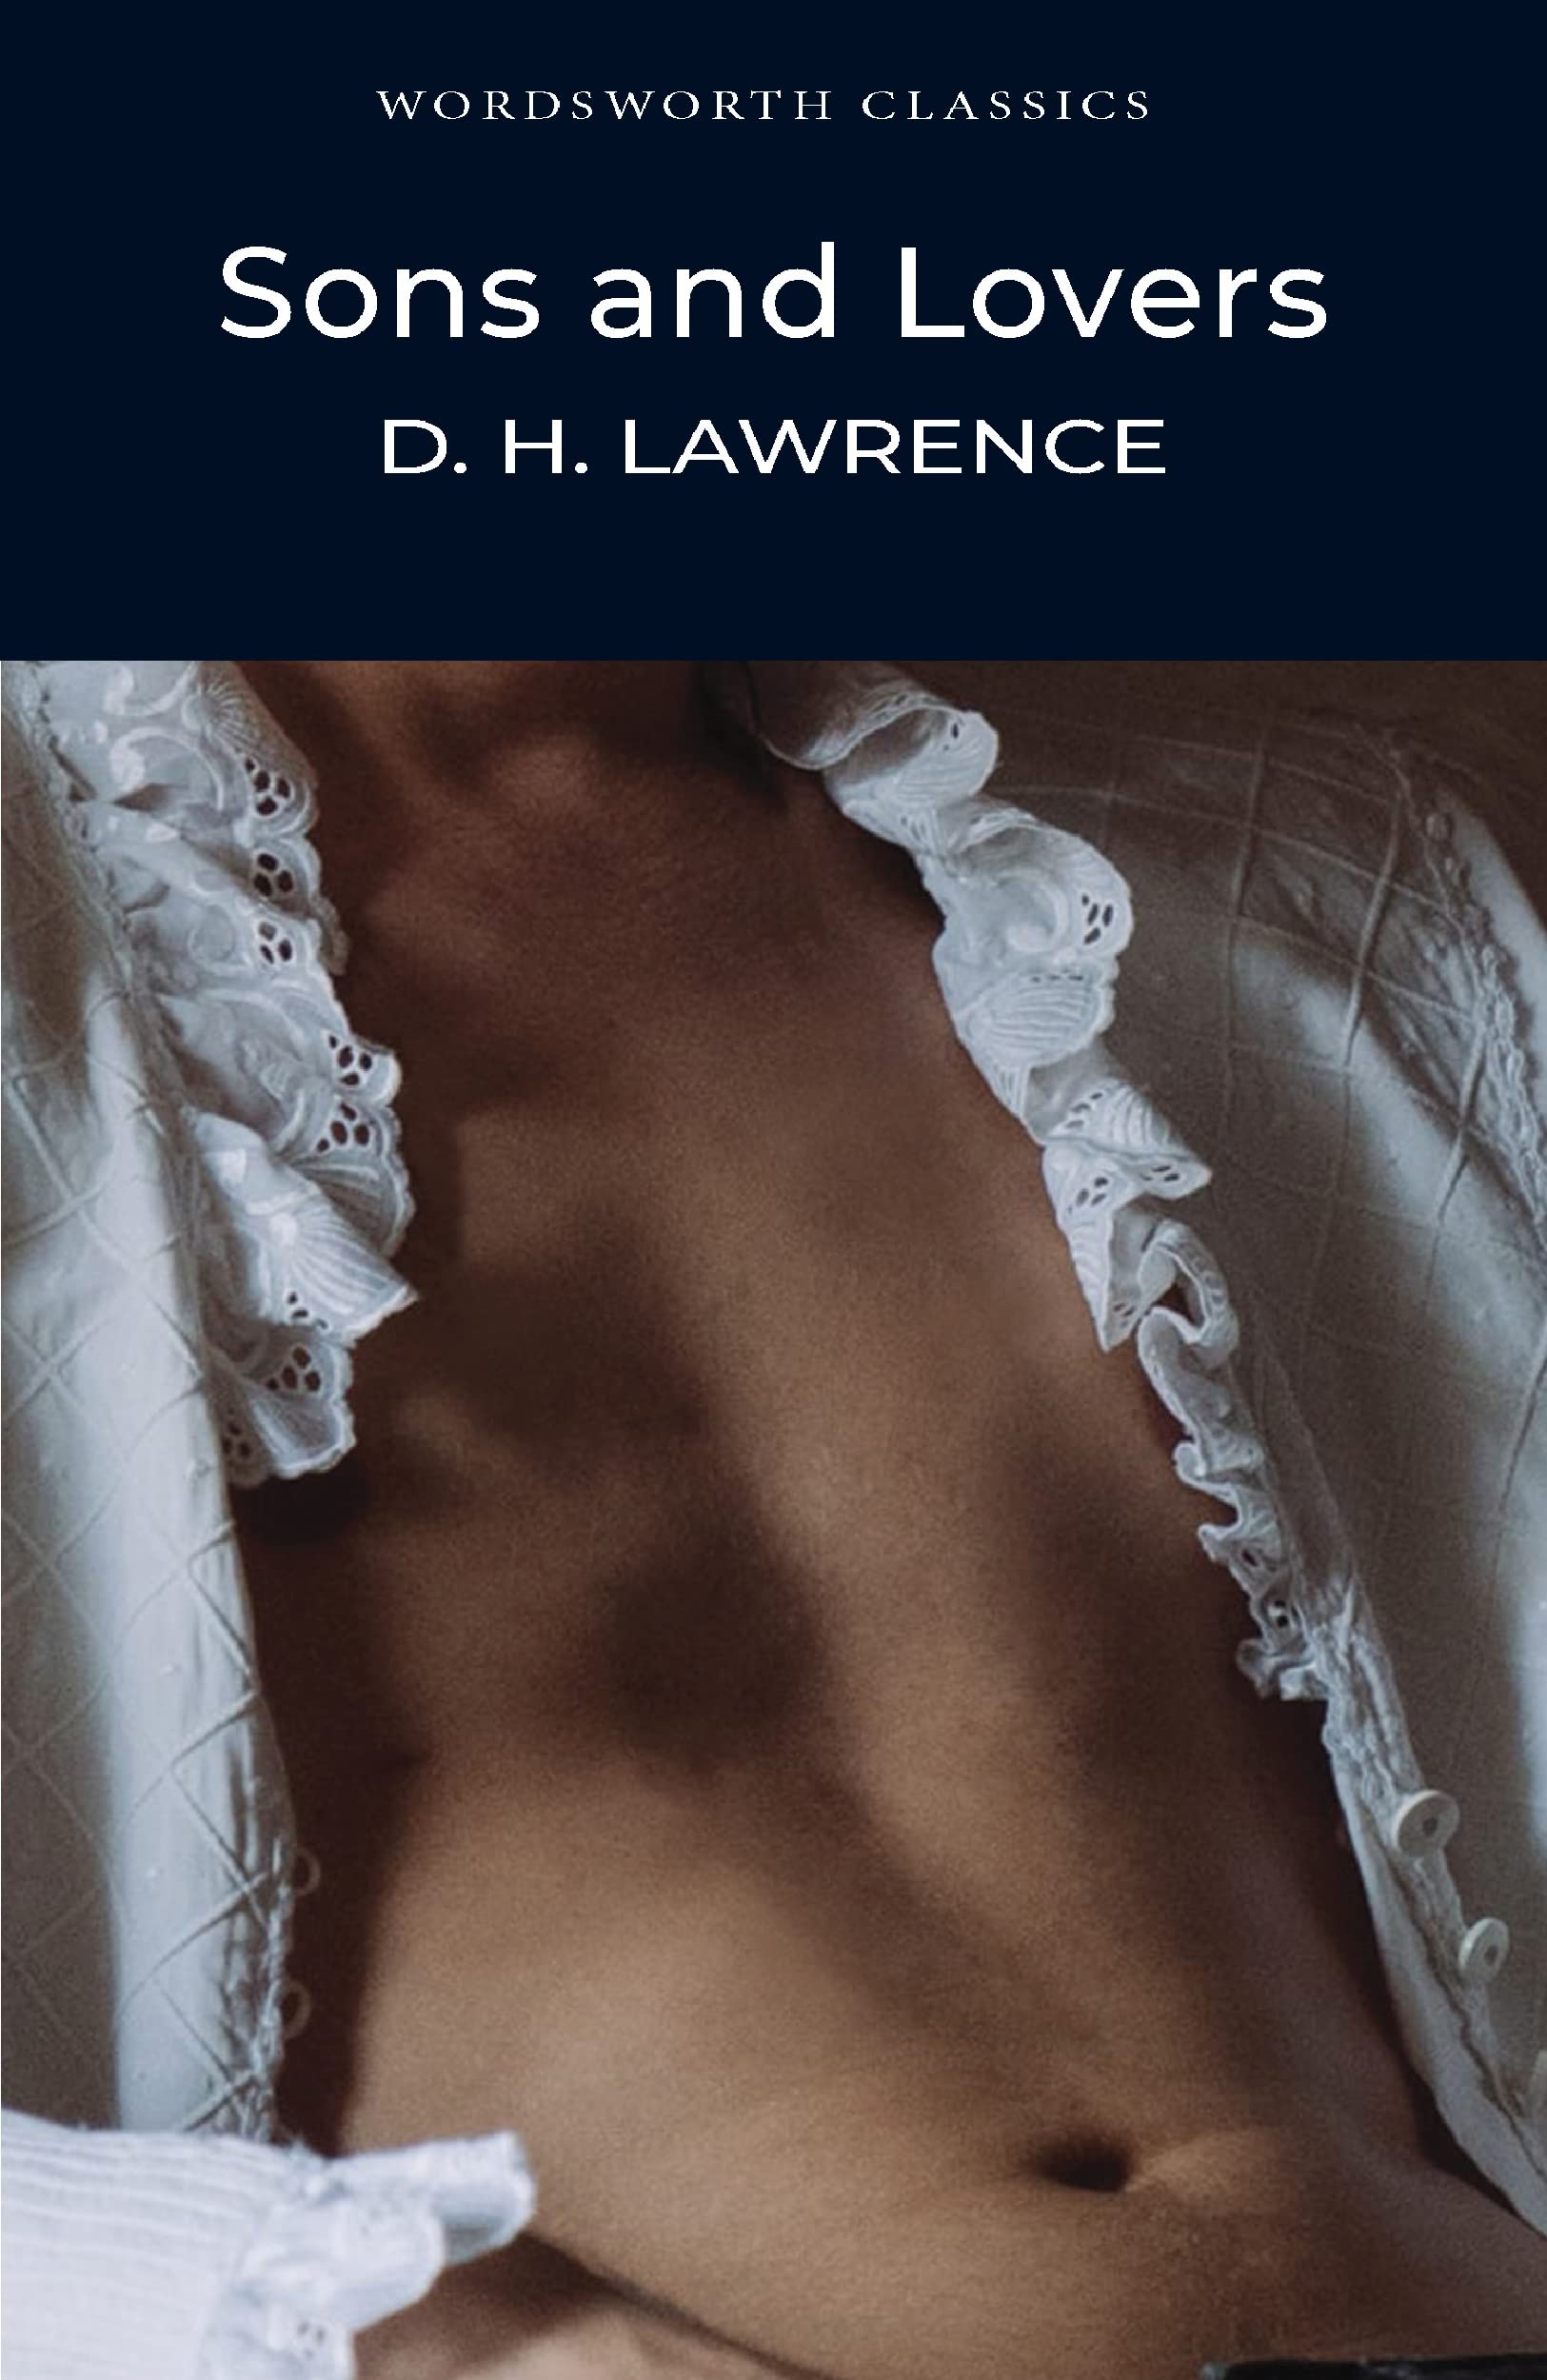 Sons and Lovers (Wordsworth Classics) by D. H. Lawrence